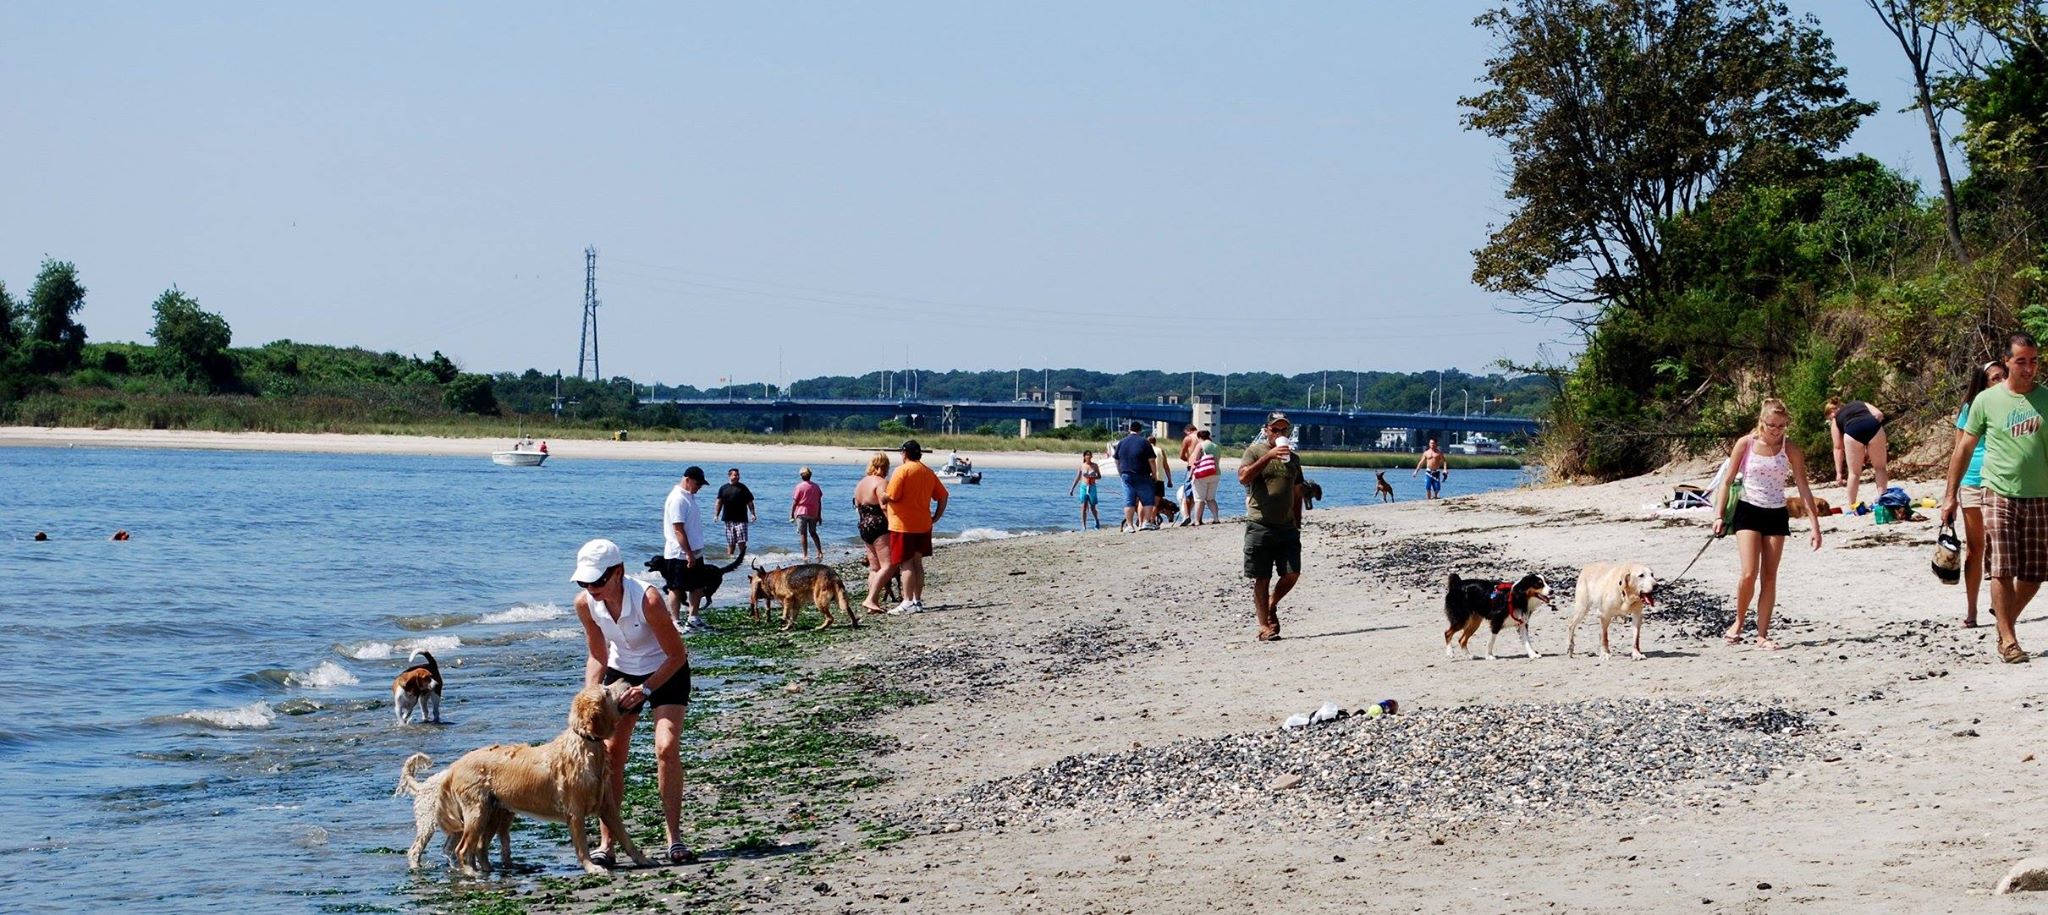 Dogs to be Restricted From 'Dog Beach' Near Manasquan Inlet, Opposition Mounts - Brick, NJ ...